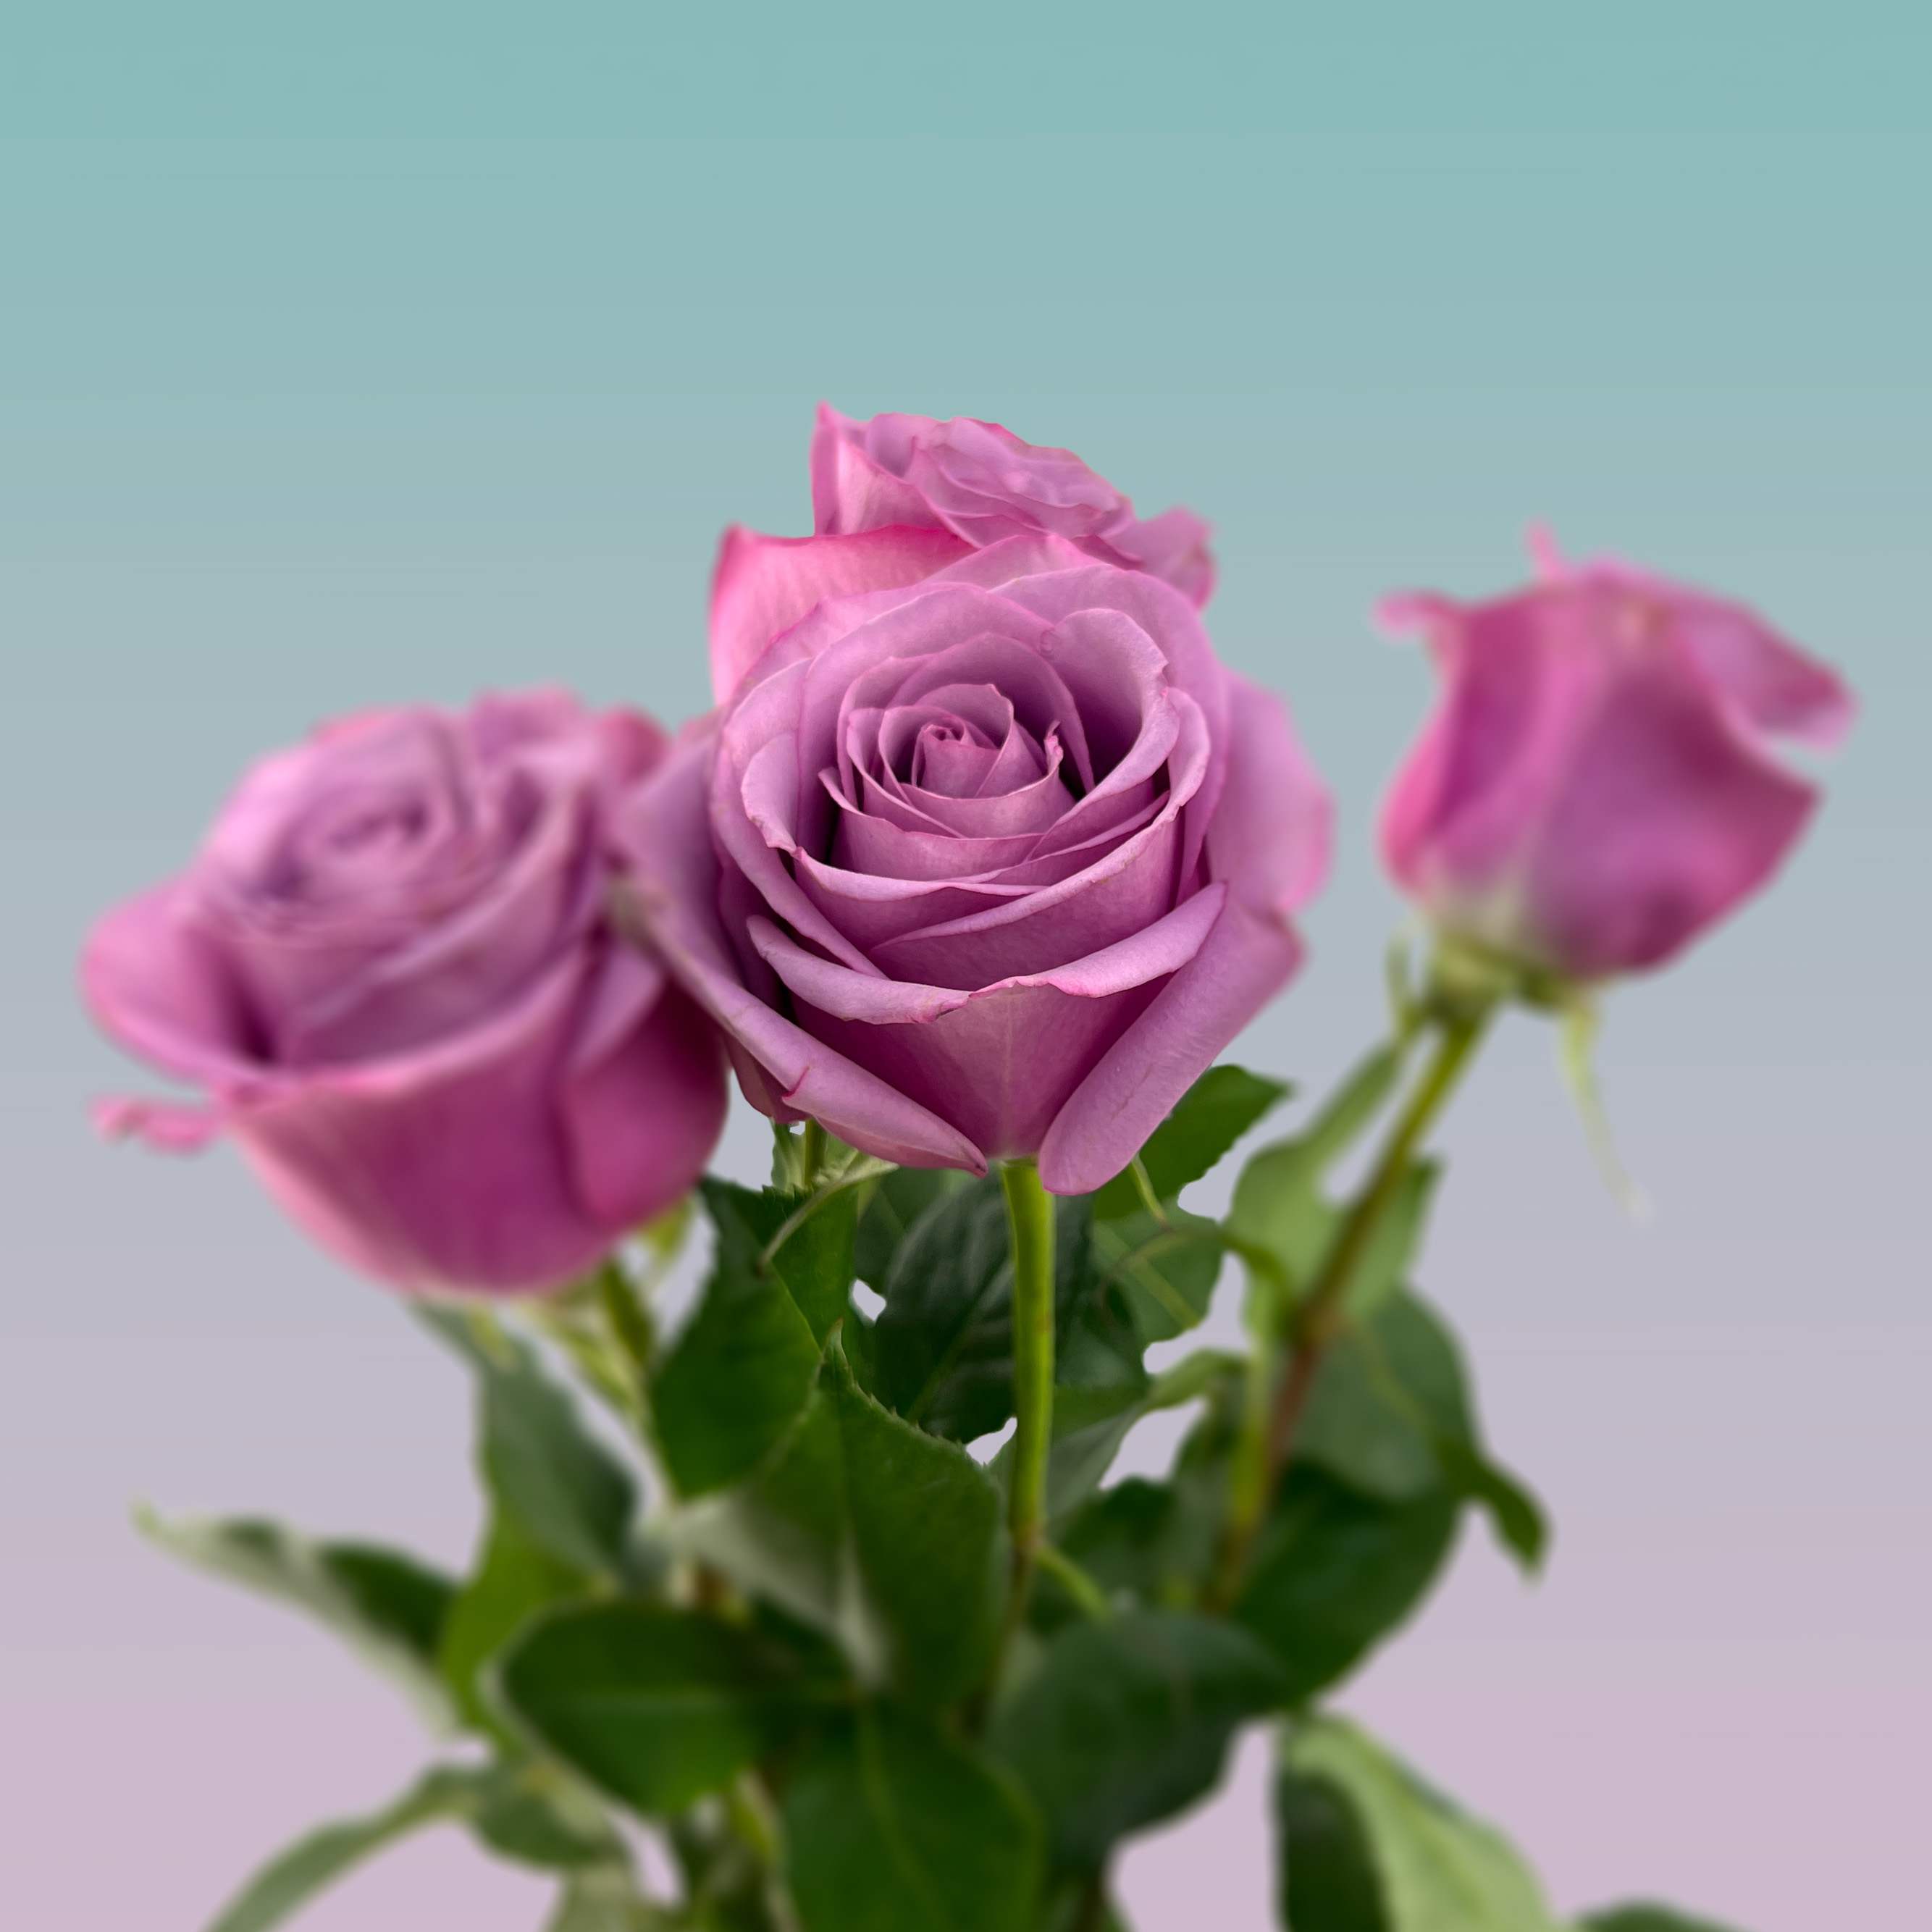 Classic Lavender Rose Bouquet - An enchanting bouquet of lavender roses sweetly touches her heart.  The roses come in a variety of lavender  tones, can not control availability, unless requested a day in advance. 